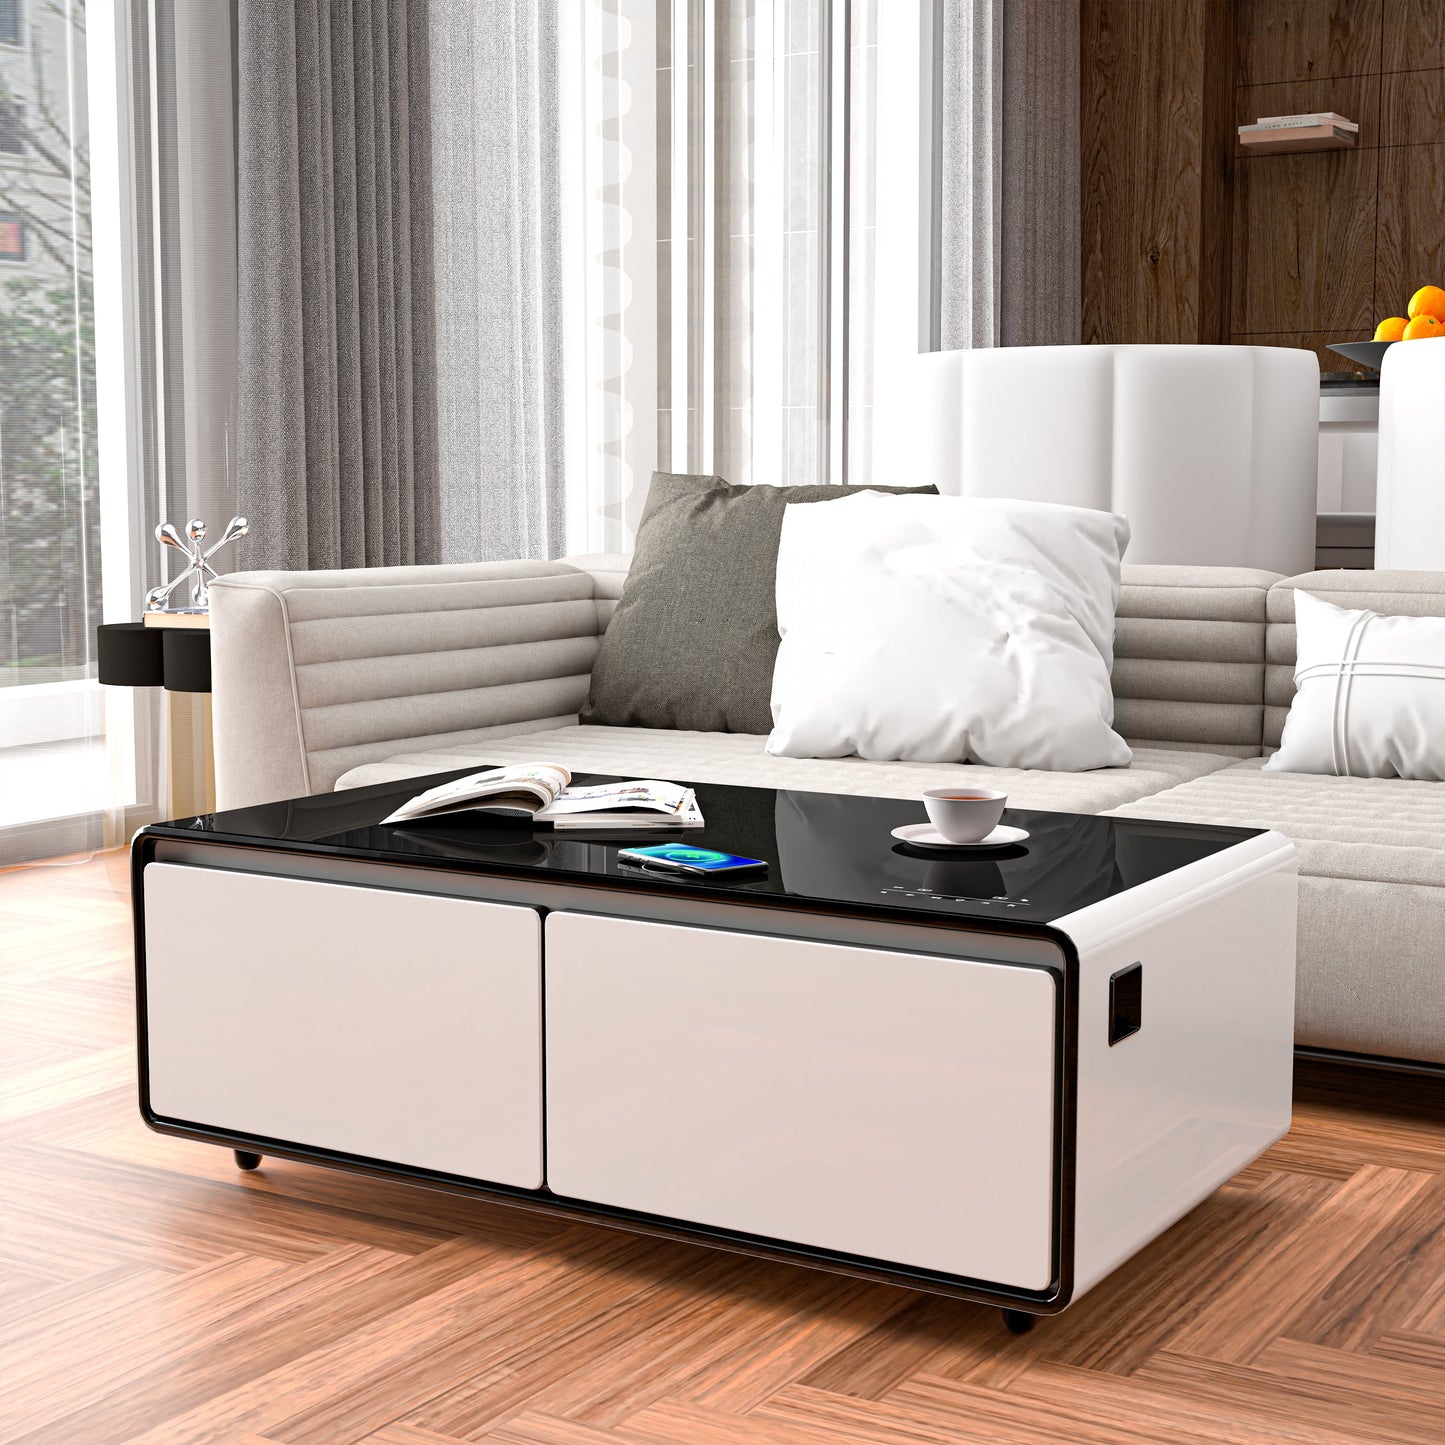 Modern Smart Coffee Table with Built-in Fridge, Bluetooth Speaker, Wireless Charging Module, Touch Control Panel, Power Socket, USB Interface, Outlet Protection, Atmosphere light, White